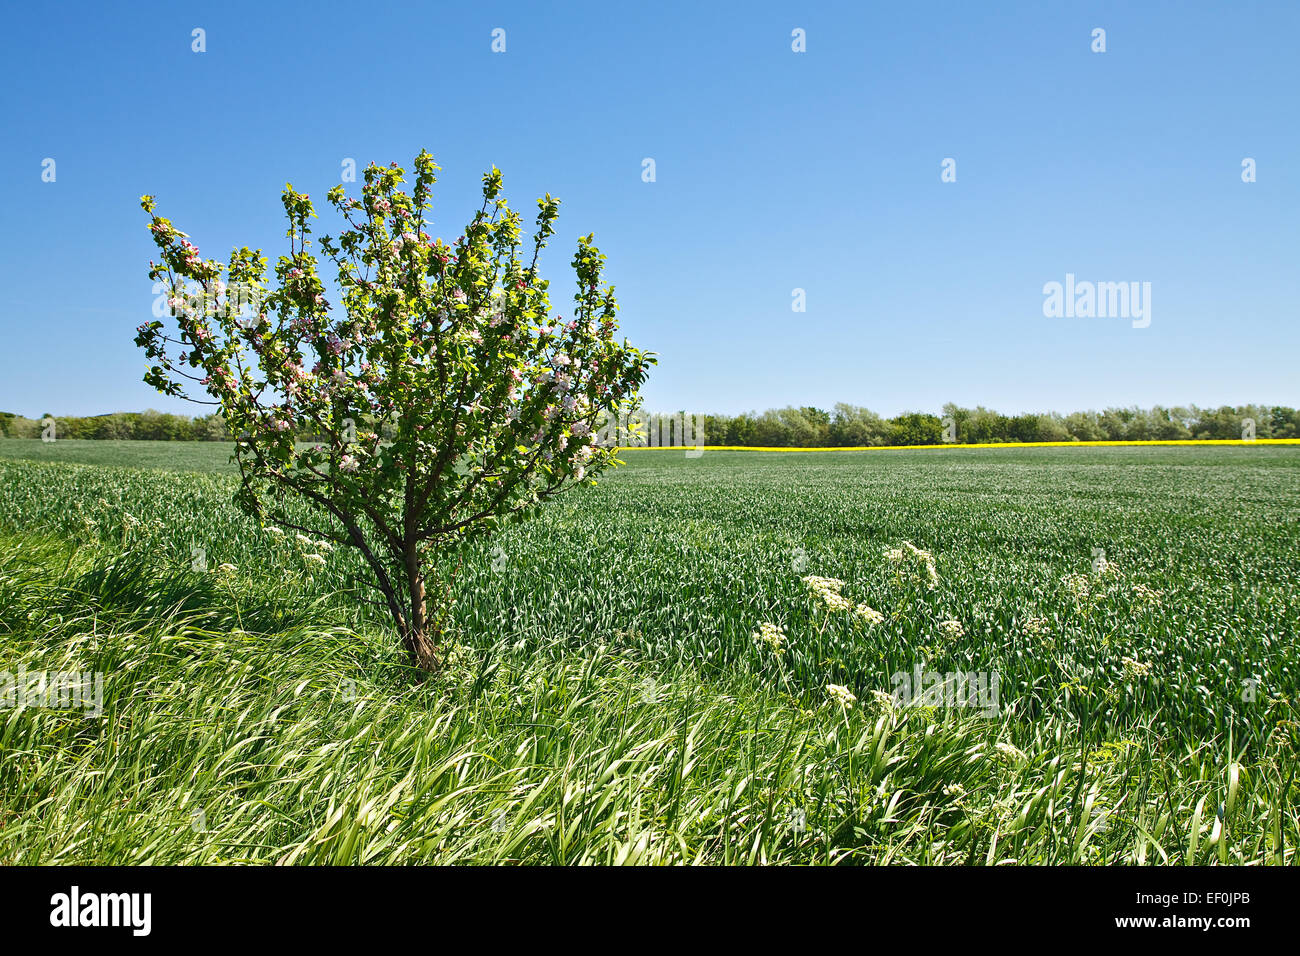 A tree at the edge of the field. Stock Photo